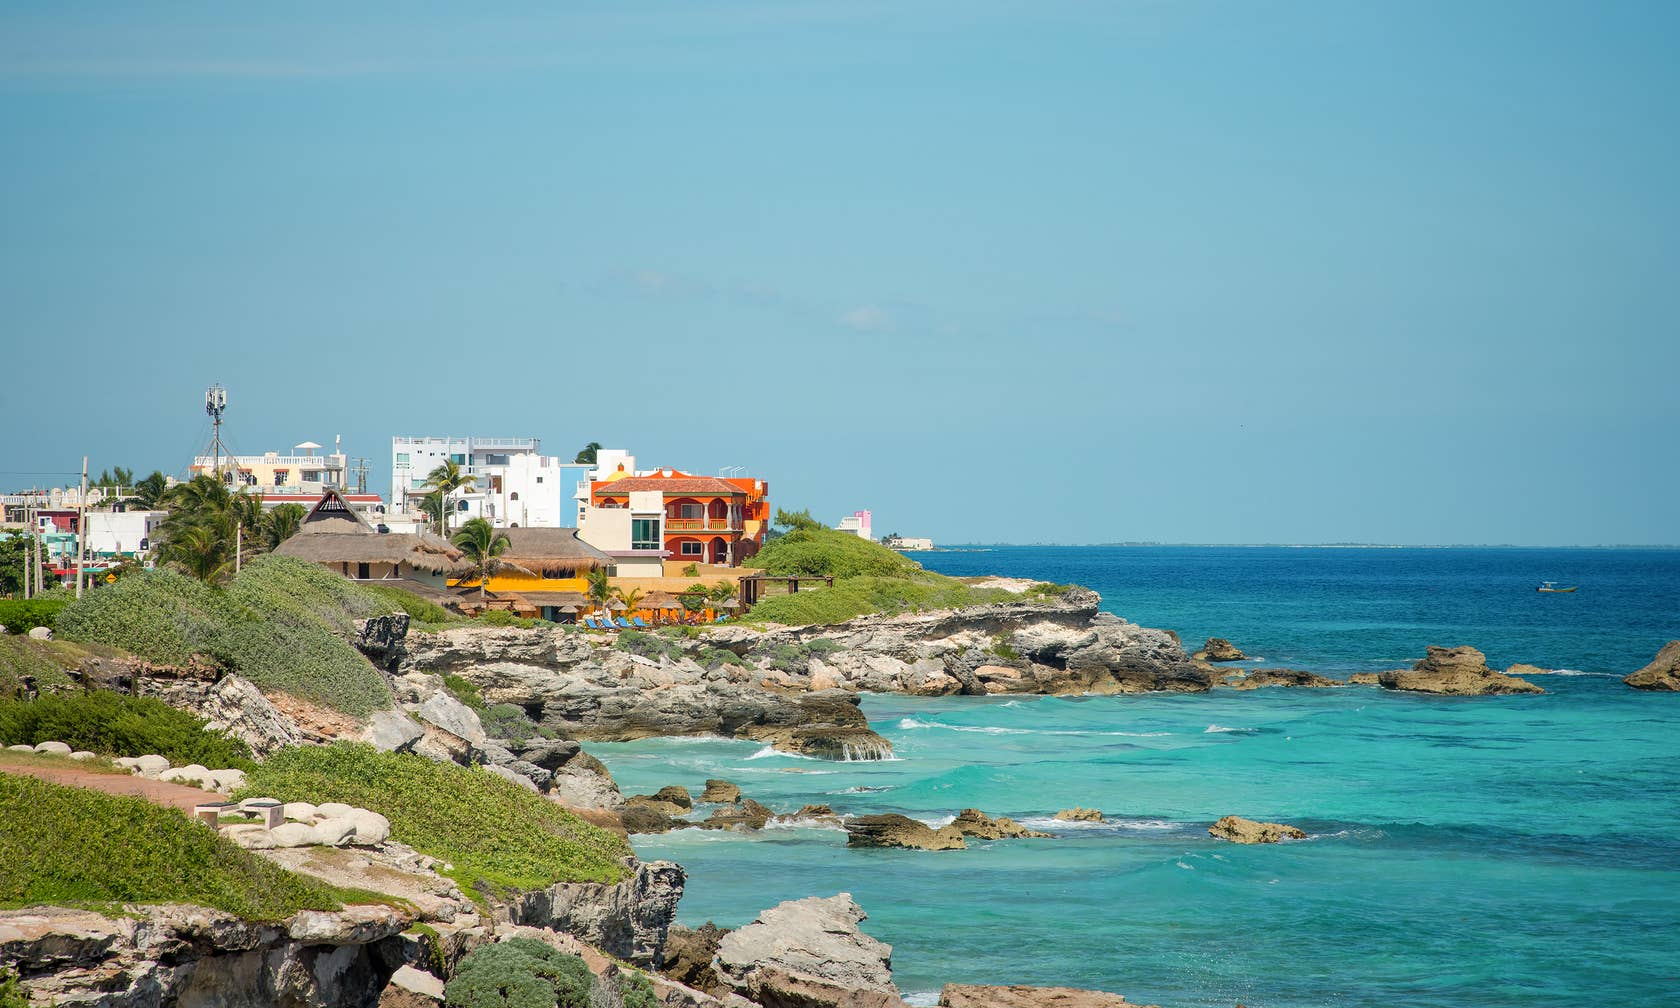 Holiday rentals in Isla Mujeres